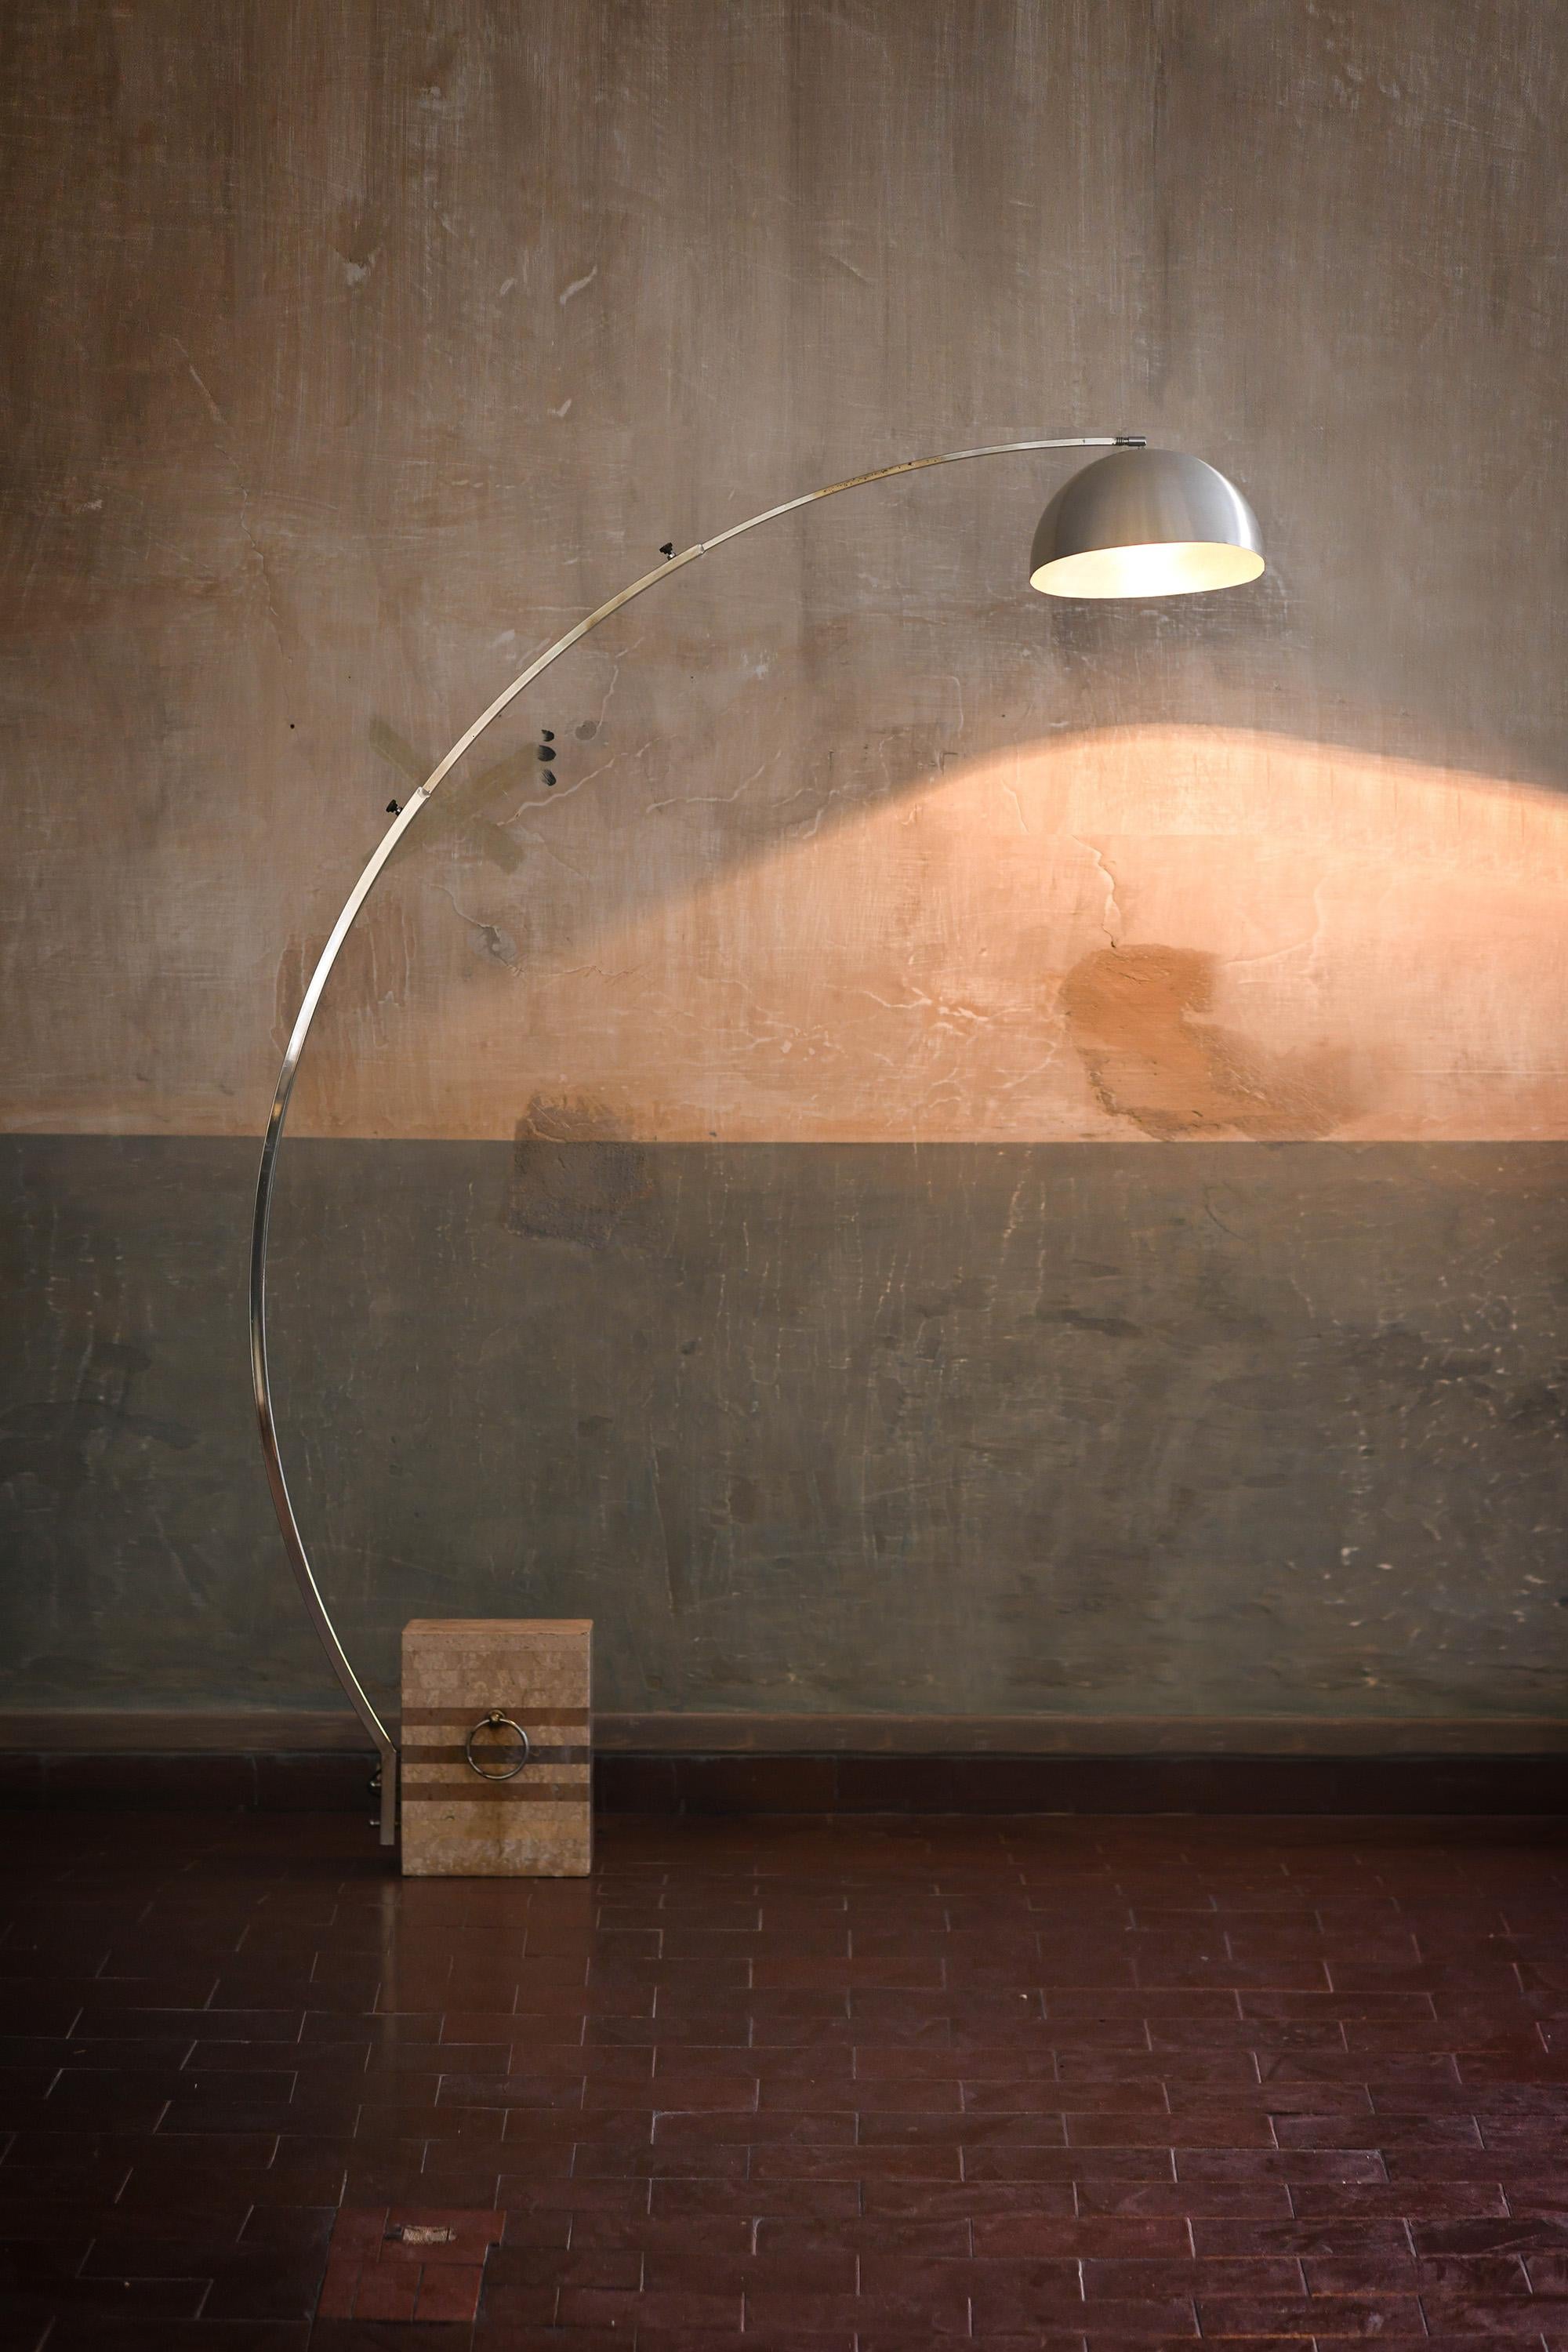 Arco lamp 1960
Product details
Marble base with metal handles, metal body with adjustable extension.
Dimensions (with maximum extension): 180 W x 230 H x 19 D cm